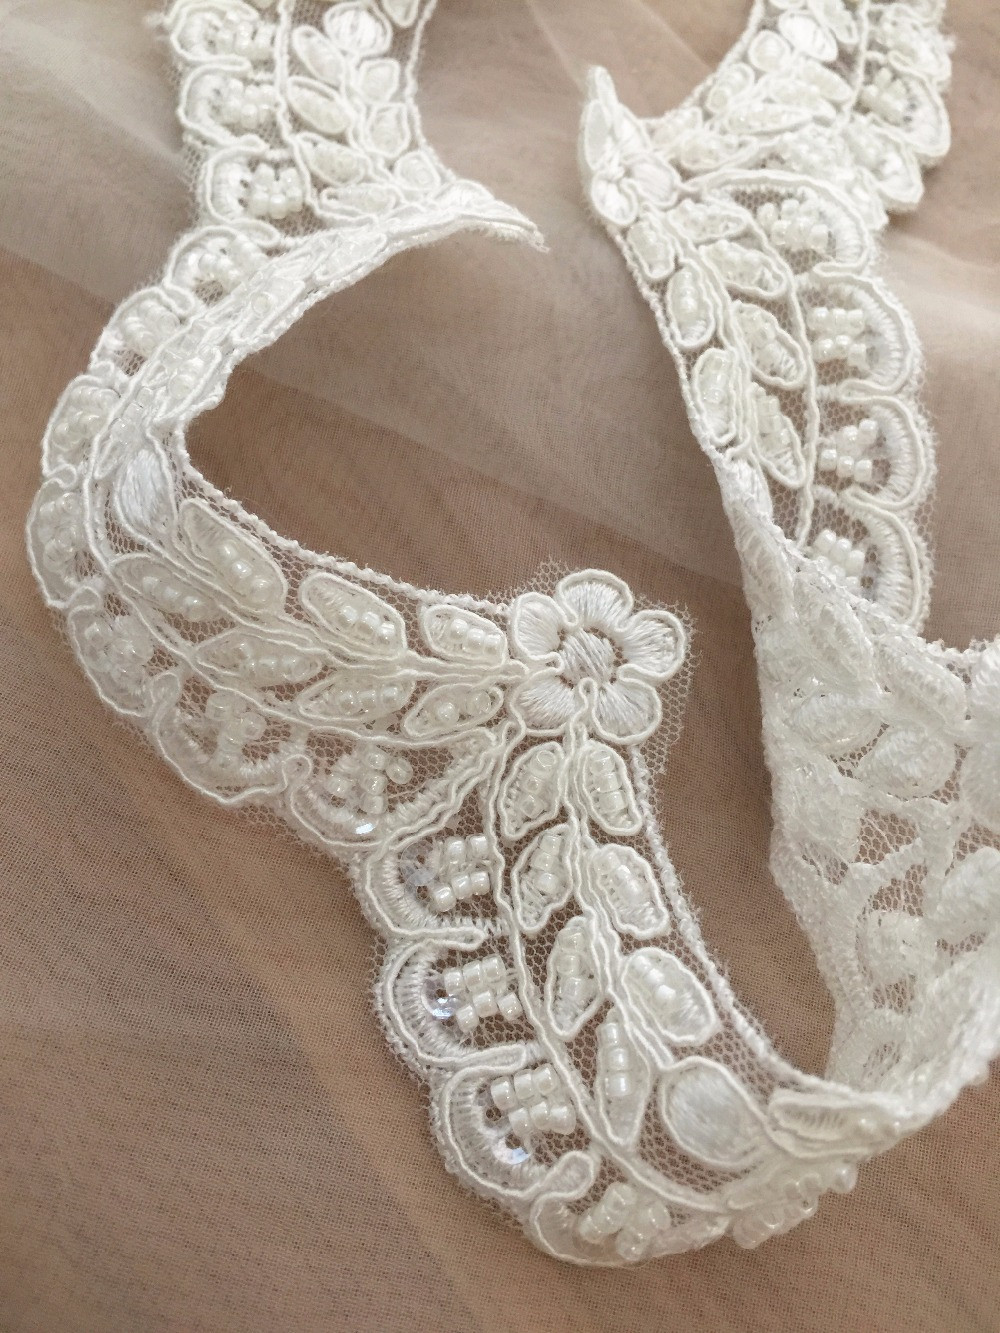 How To Make A Wedding Veil With Lace Trim
 Ivory beaded lace trim narrow small size 4CM lace for